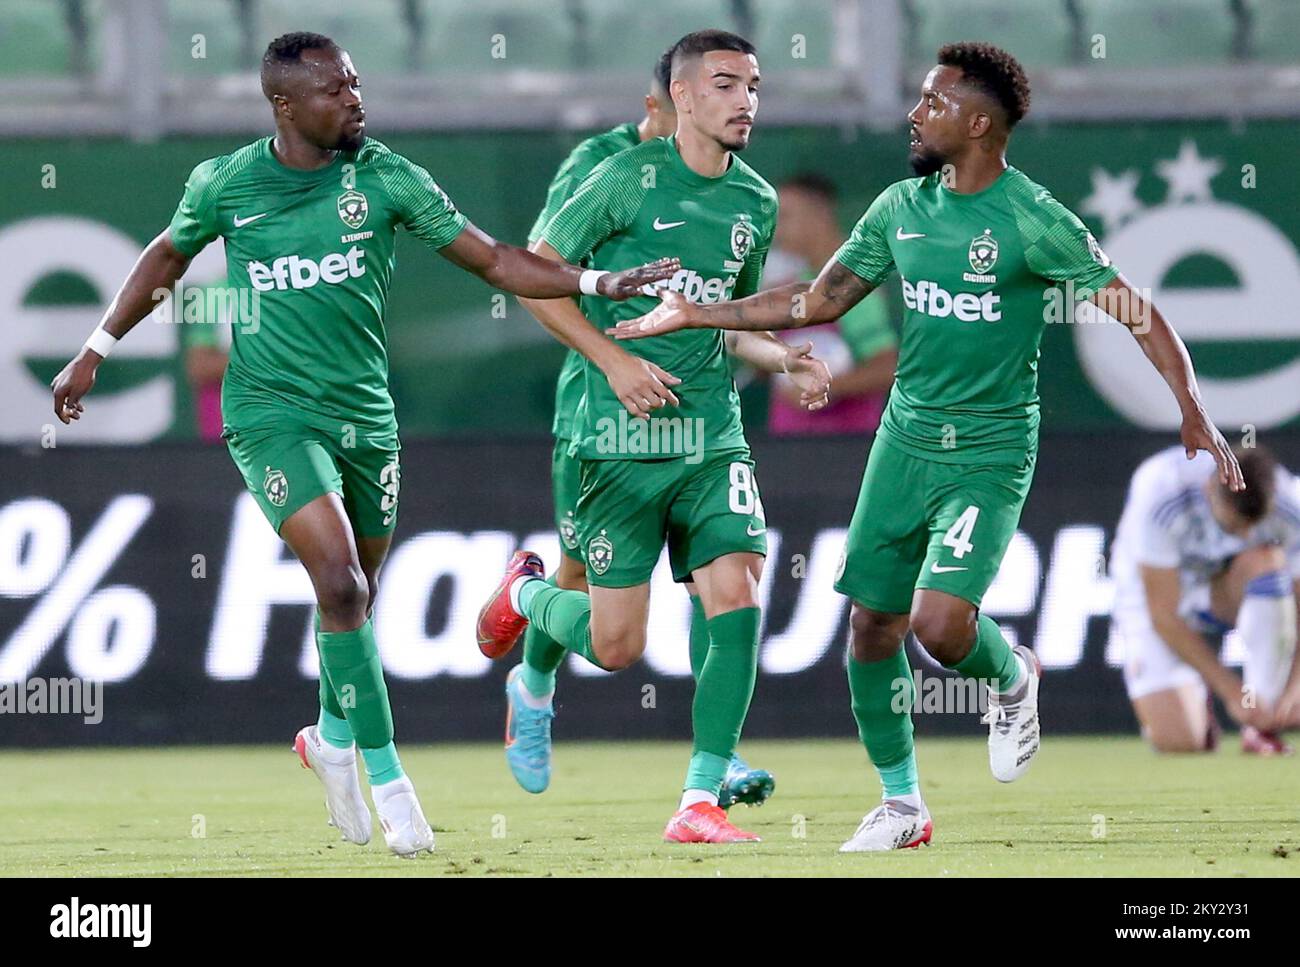 Bulgarian football fairy tale: Ludogorets in the Champions League